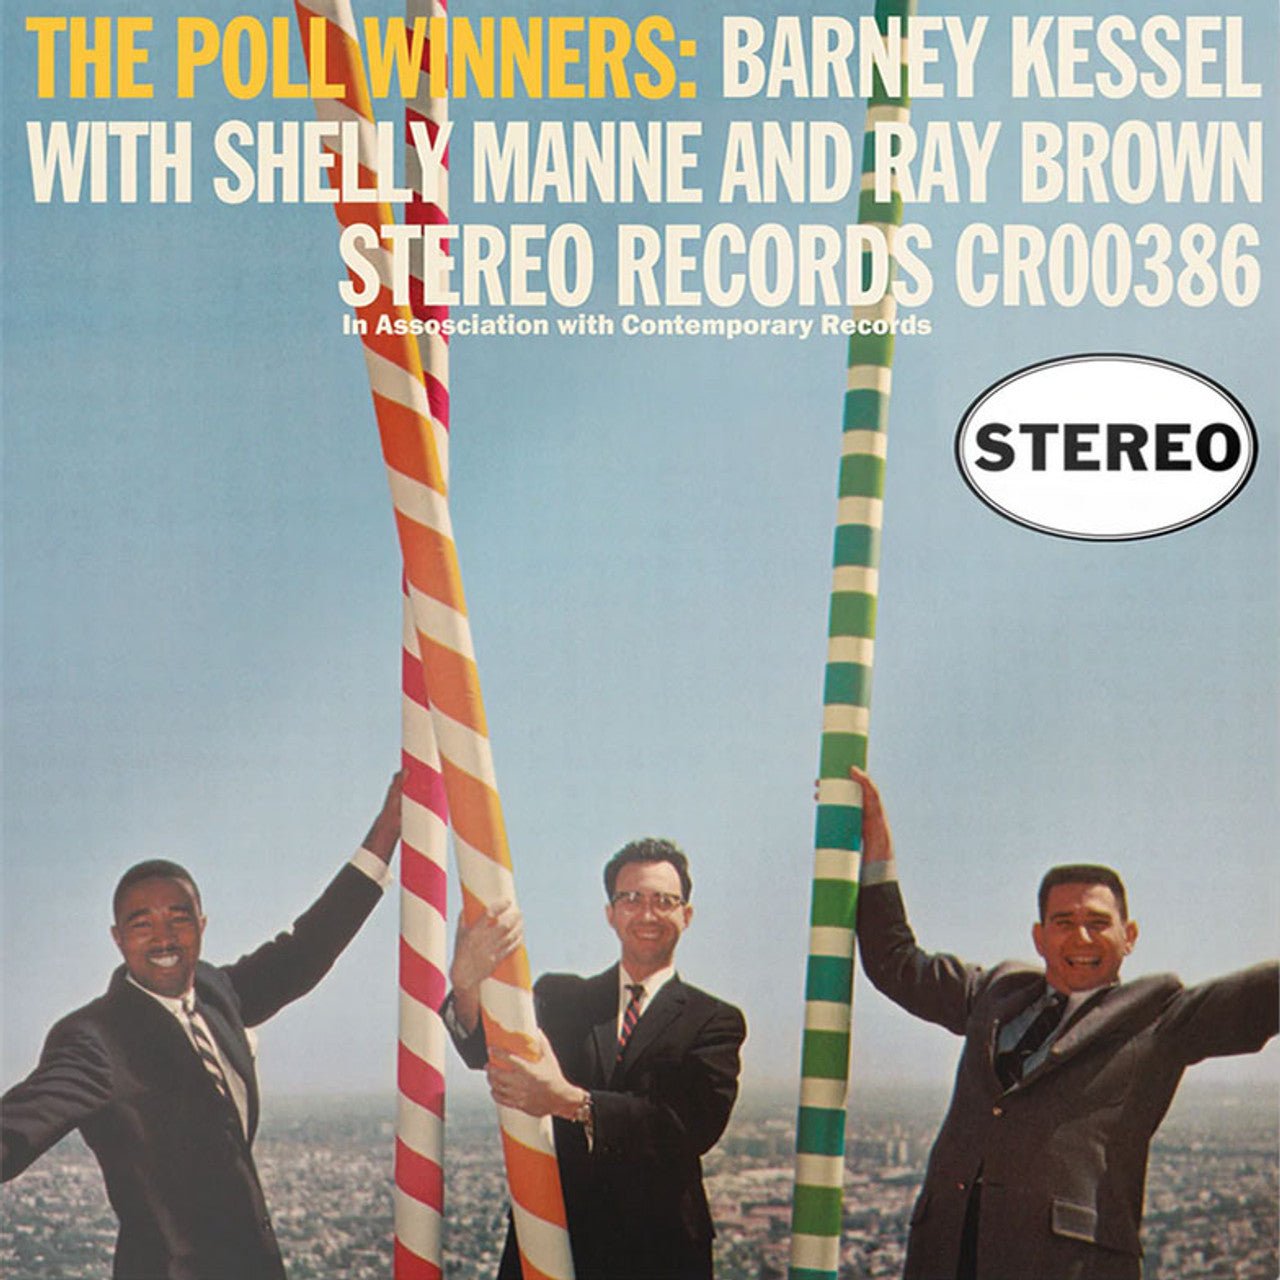 Kessel, Barney with Shelly Manne and Ray Brown - Poll Winners (Acoustic Sounds Series, 180 Gram) - 888072240919 - LP's - Yellow Racket Records